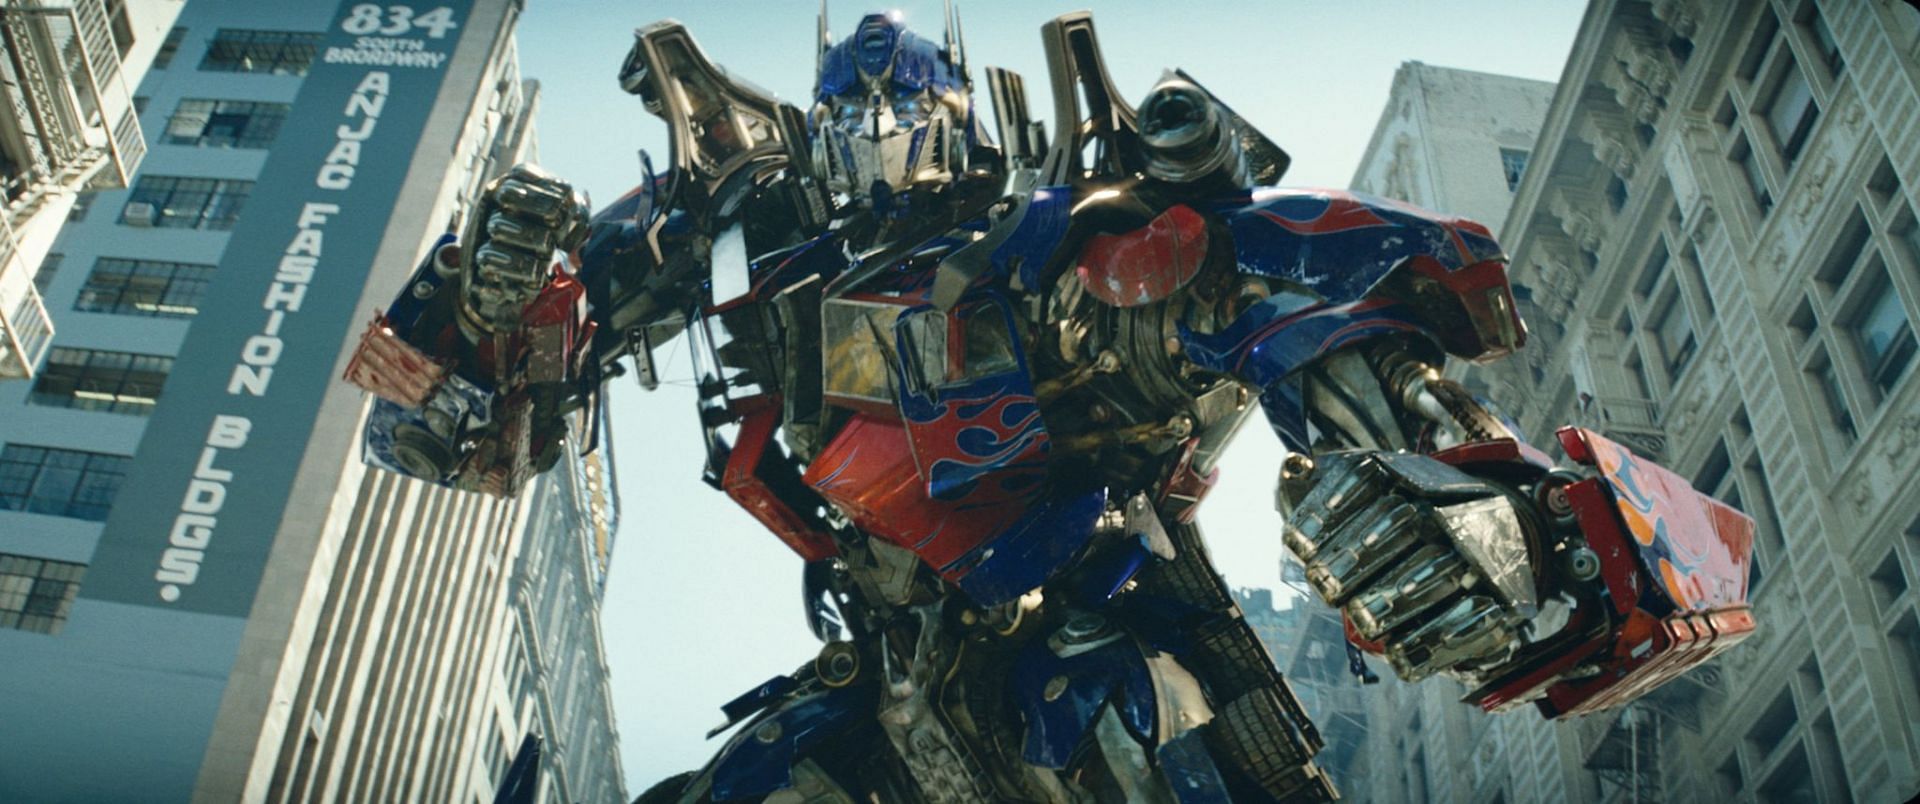 Autobots to Decepticons: The Cinematic Journey of Transformers (Image via Paramount Pictures)